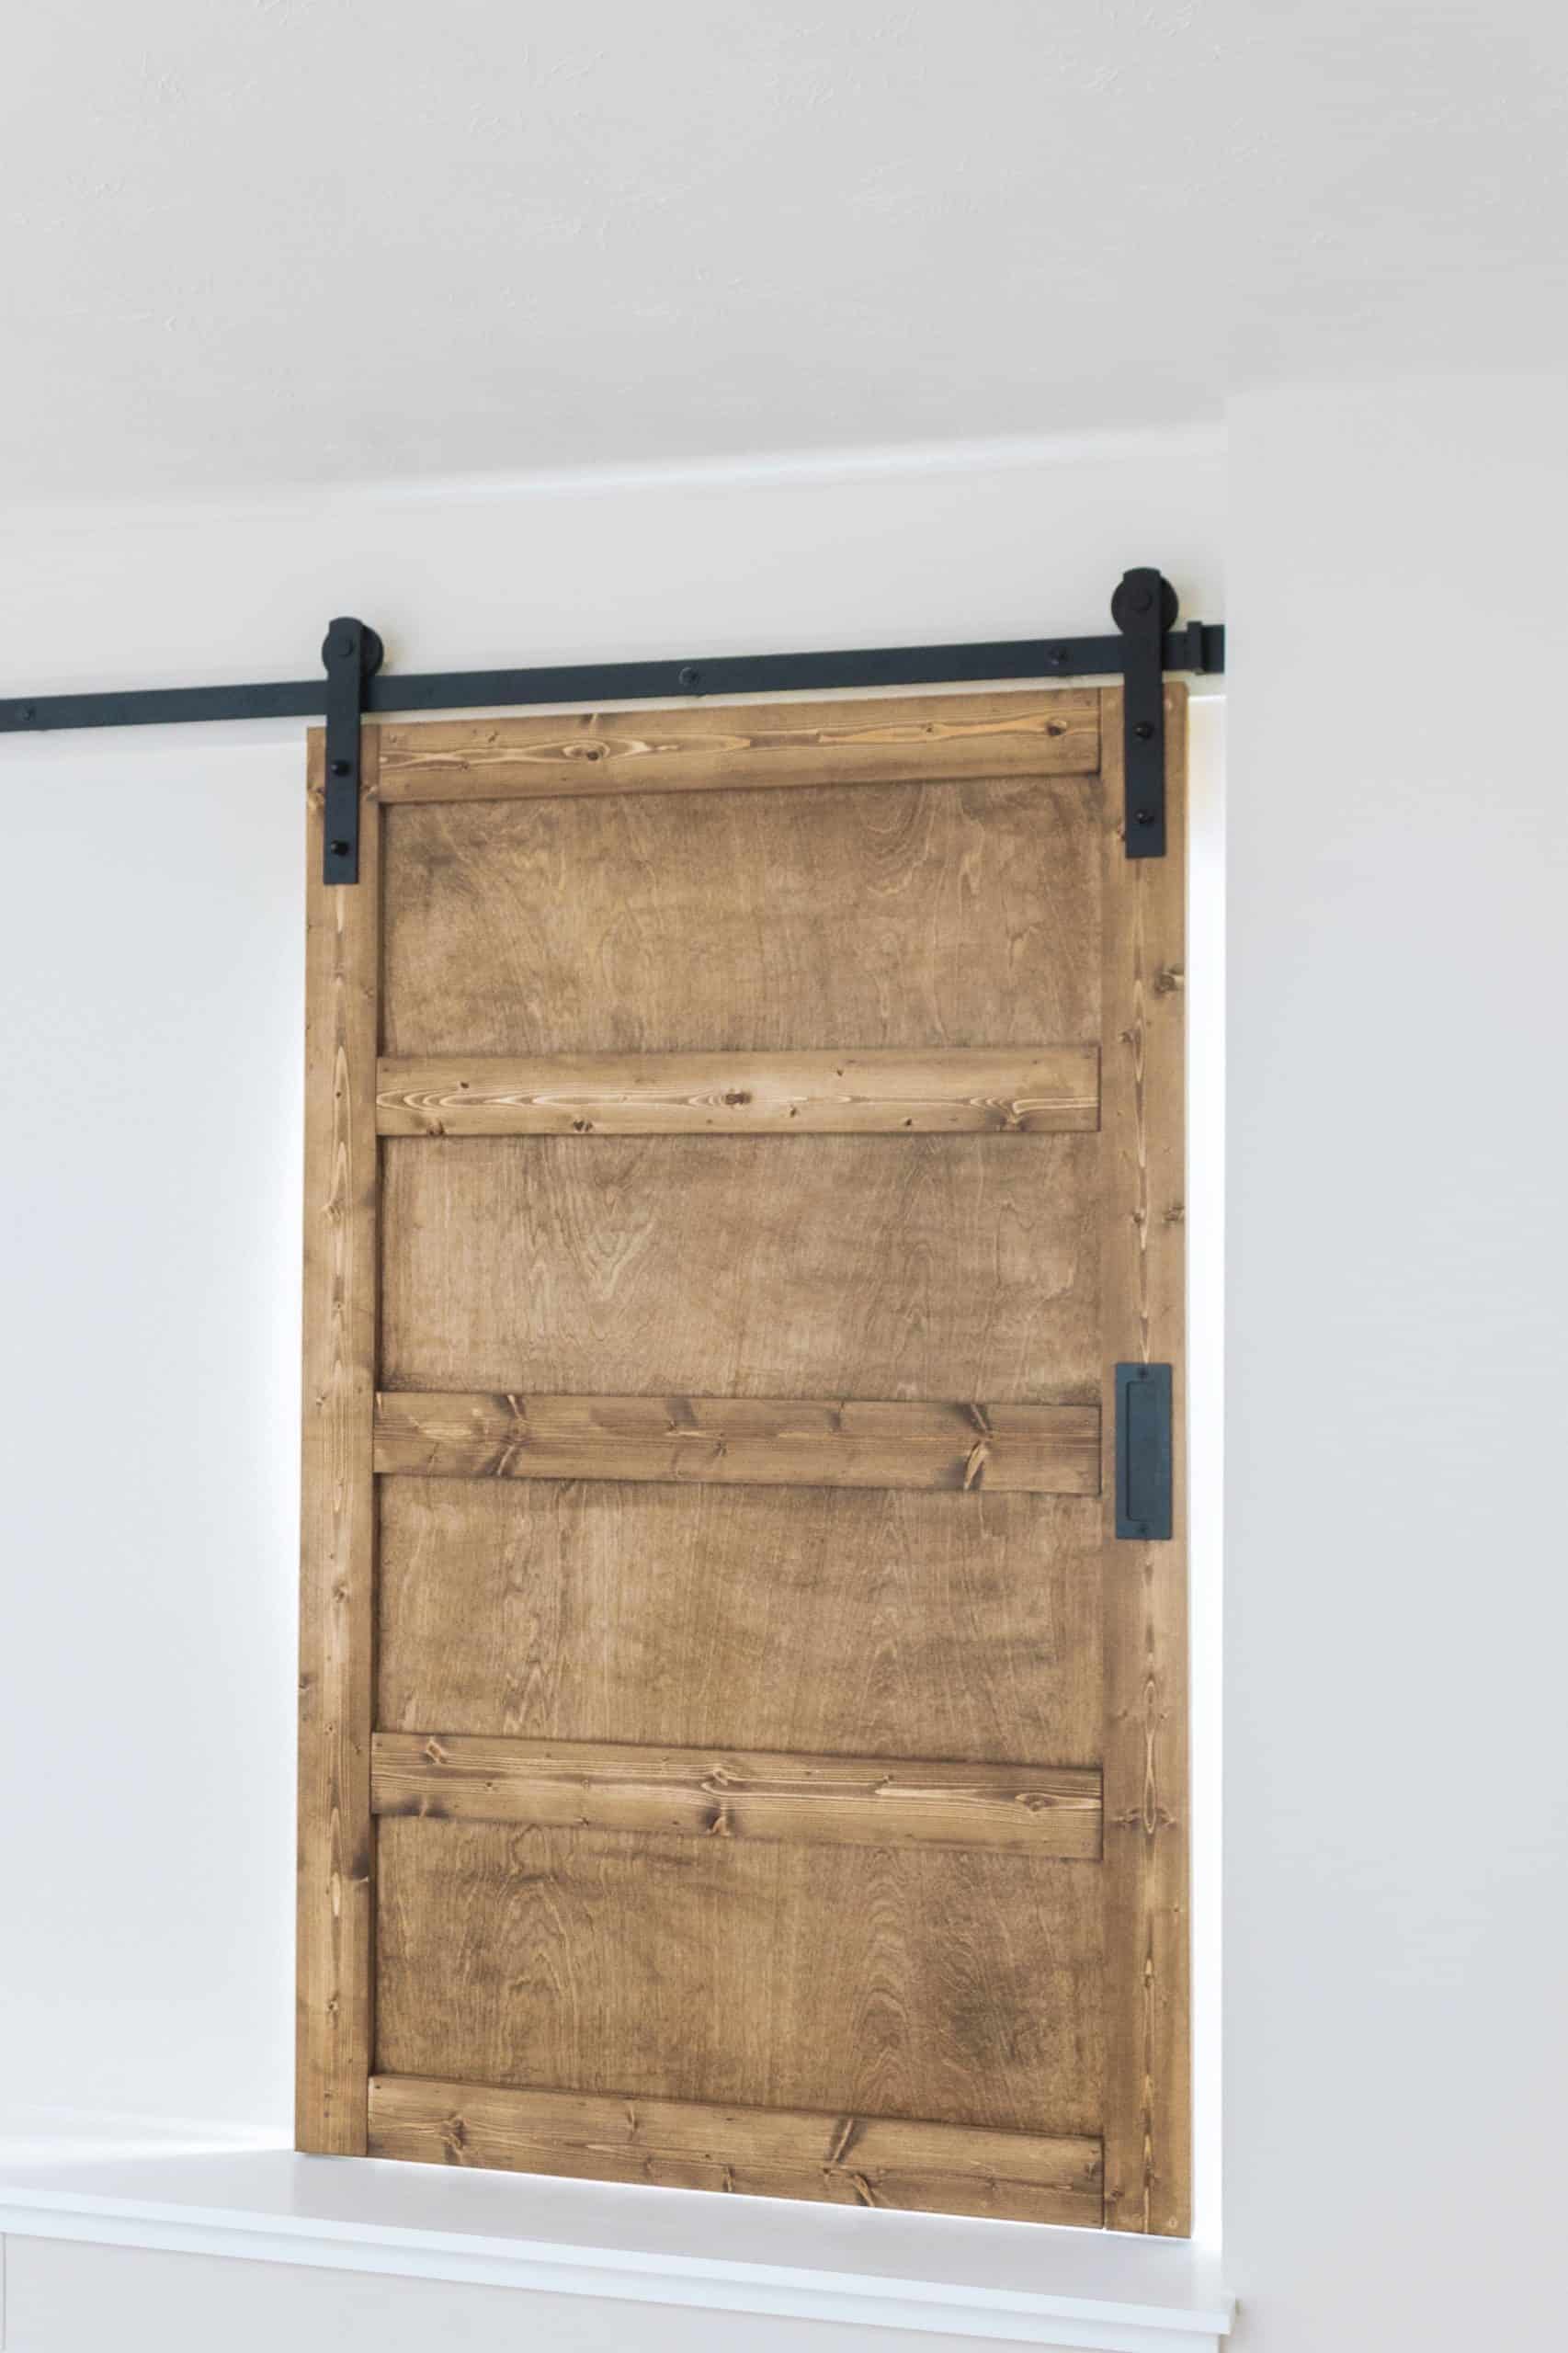 Want to build a modern farmhouse-inspired sliding barn door window covering? Head to www.freeandunfettered.com for the complete tutorial. #diyhome #modernfarmhouse #slidingbarndoor #diyhomedecor 